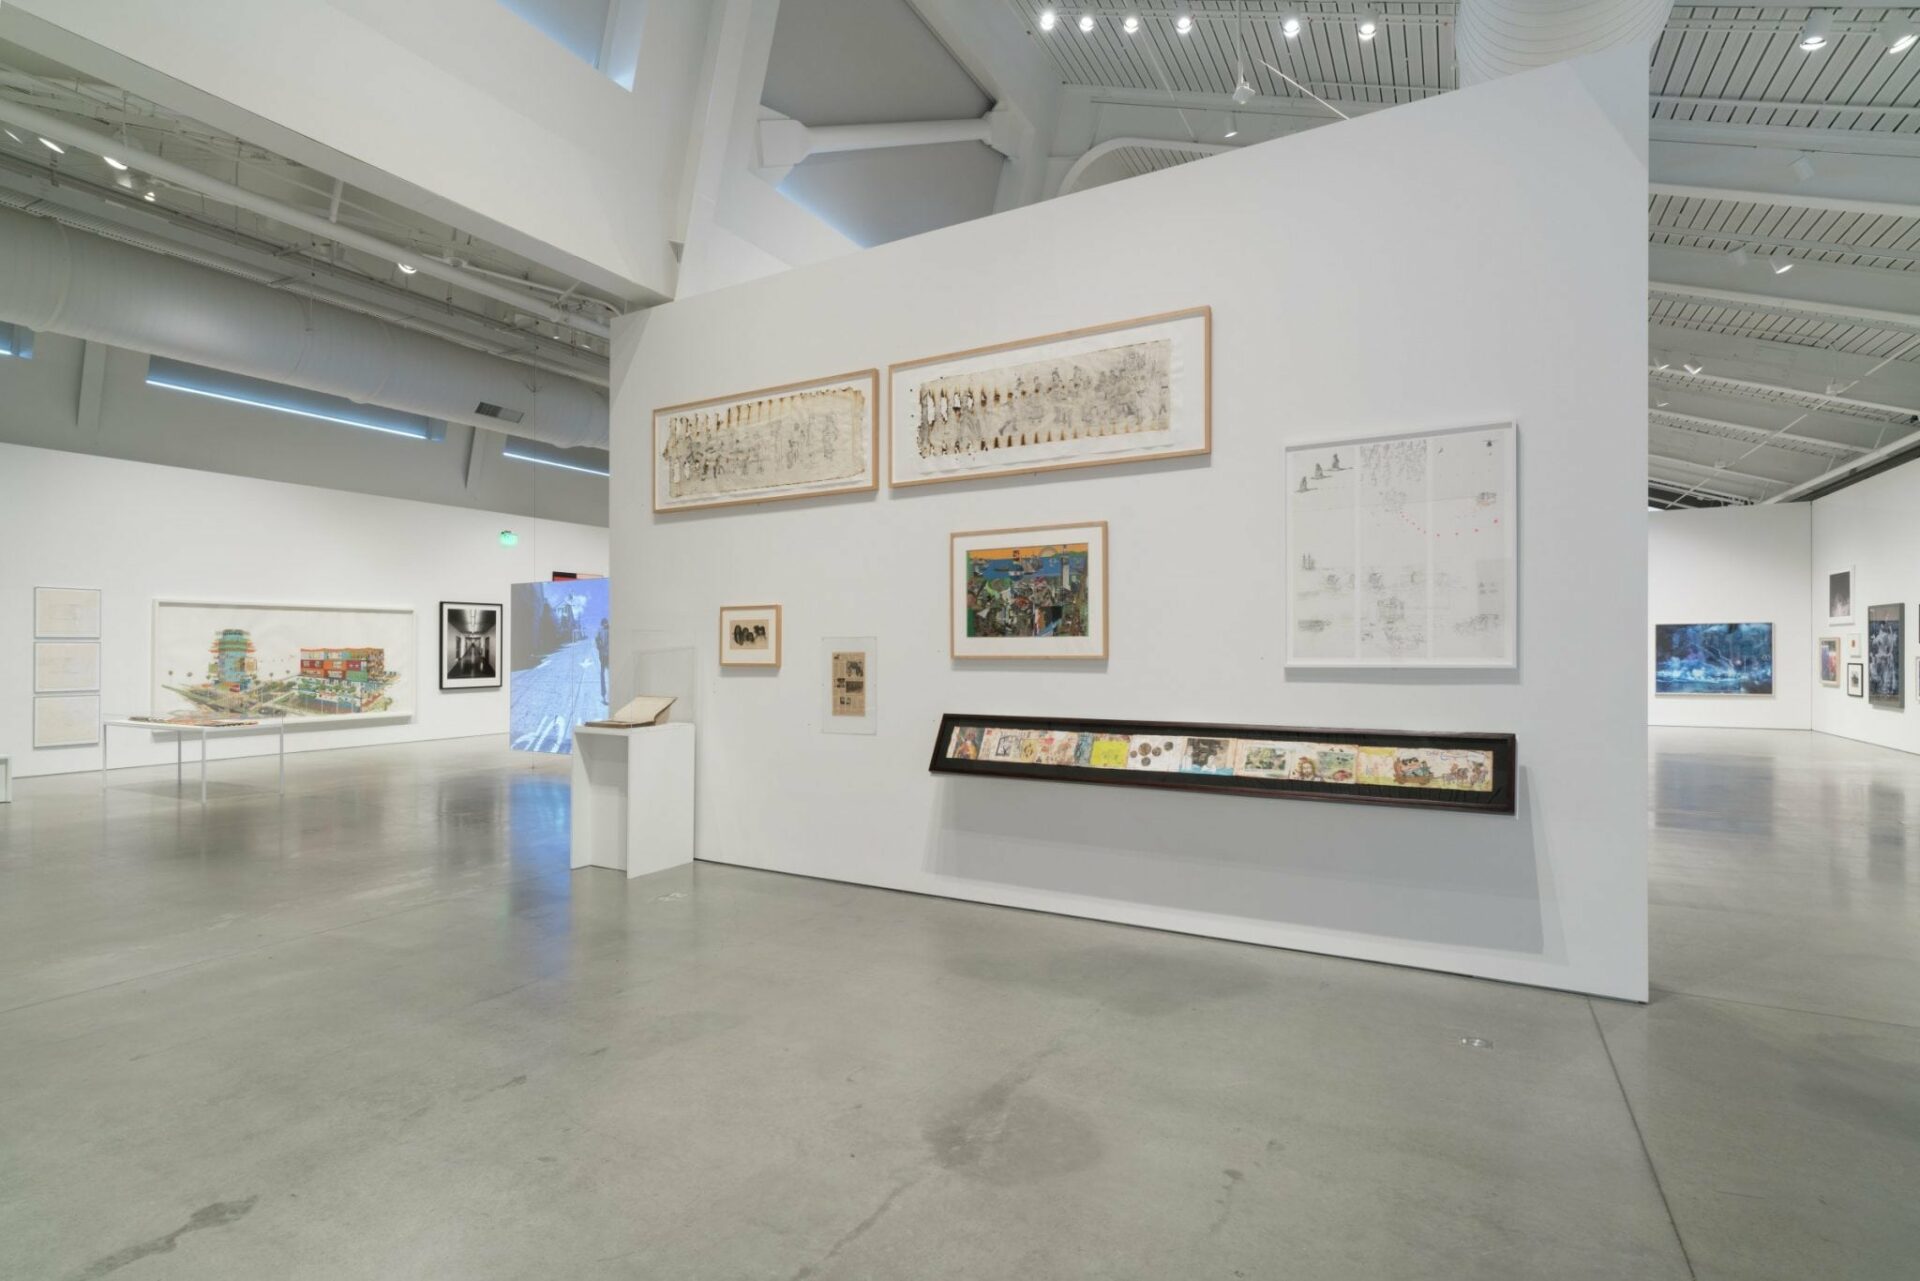 Way Bay I, Exhibition and Acquisition of the Permanent Collection of BAMPFA, Berkeley, CA